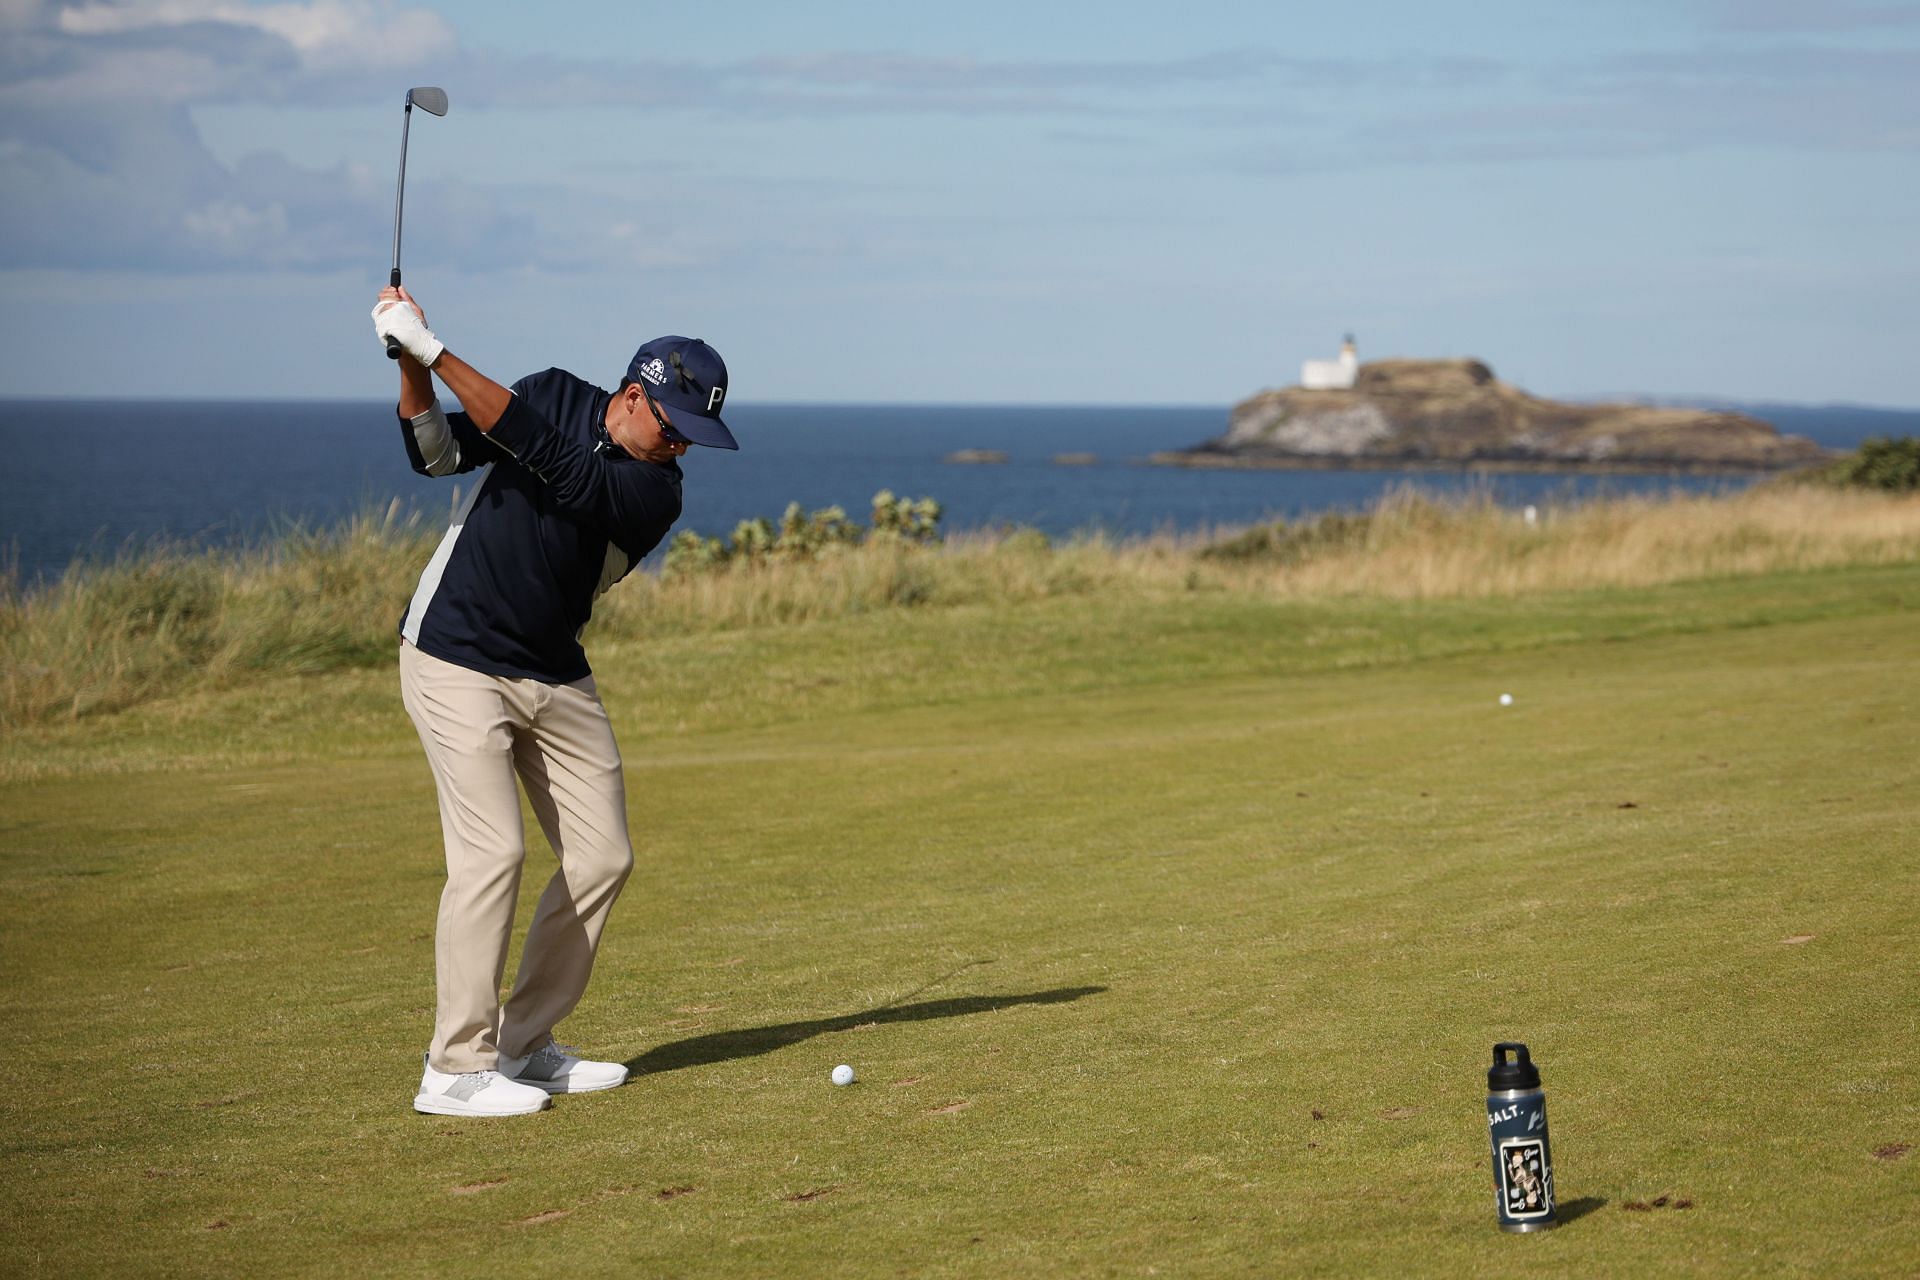 Rickie Fowler at the 2023 Genesis Scottish Open - Day One (Image via Getty)